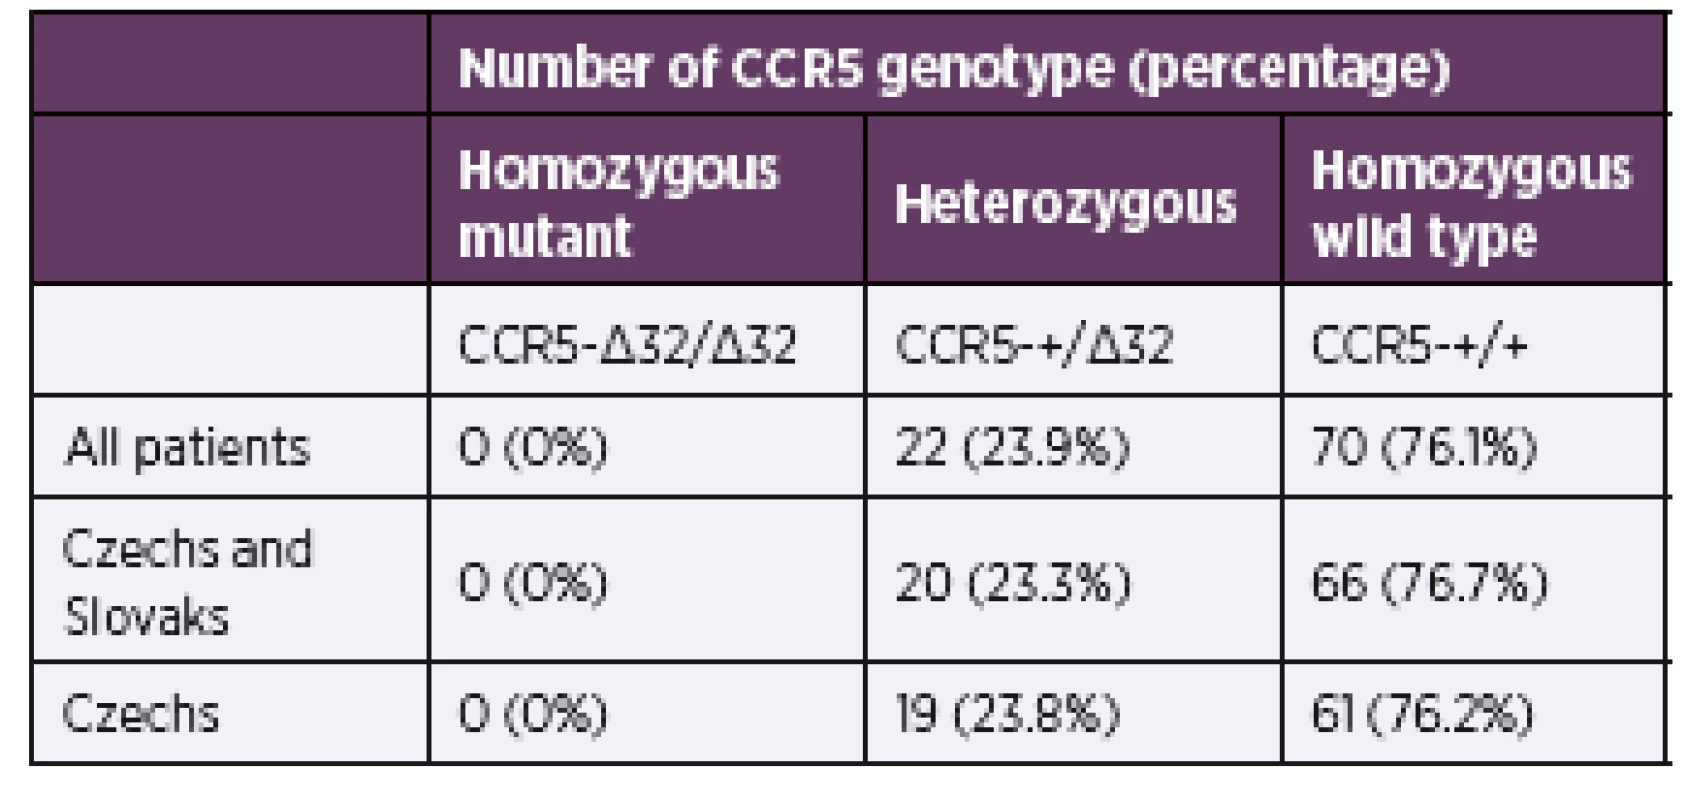 Percentages of each CCR5 genotype among HIVseropositive
individuals in study population